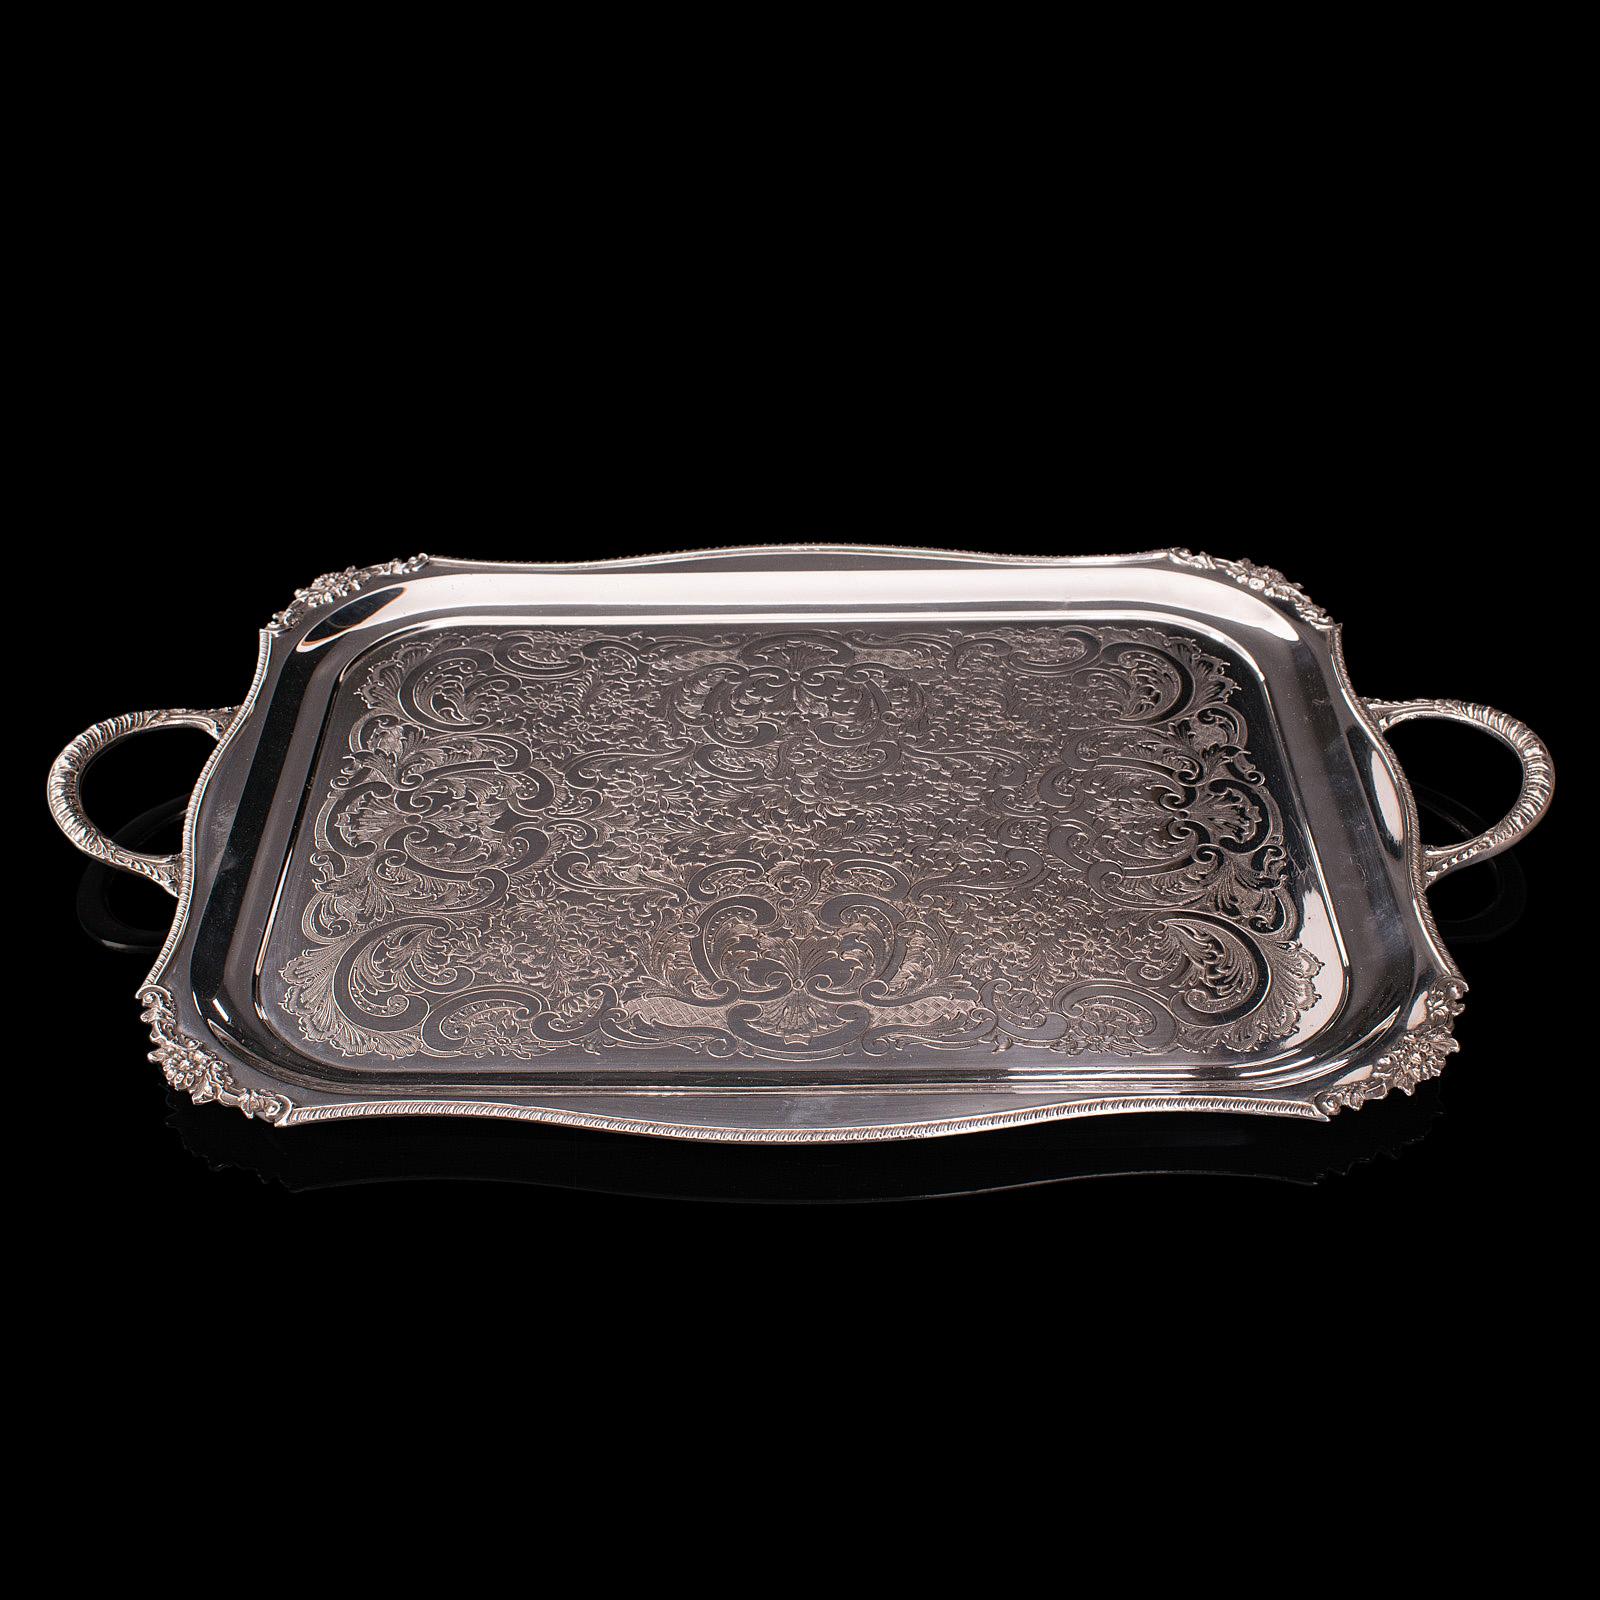 This is a vintage serving tray. An English, silver plated afternoon tea platter by Viners of Sheffield, dating to the mid 20th century, circa 1940.

Profusely detailed and pleasingly ornate tray
Displays a desirable aged patina and in good